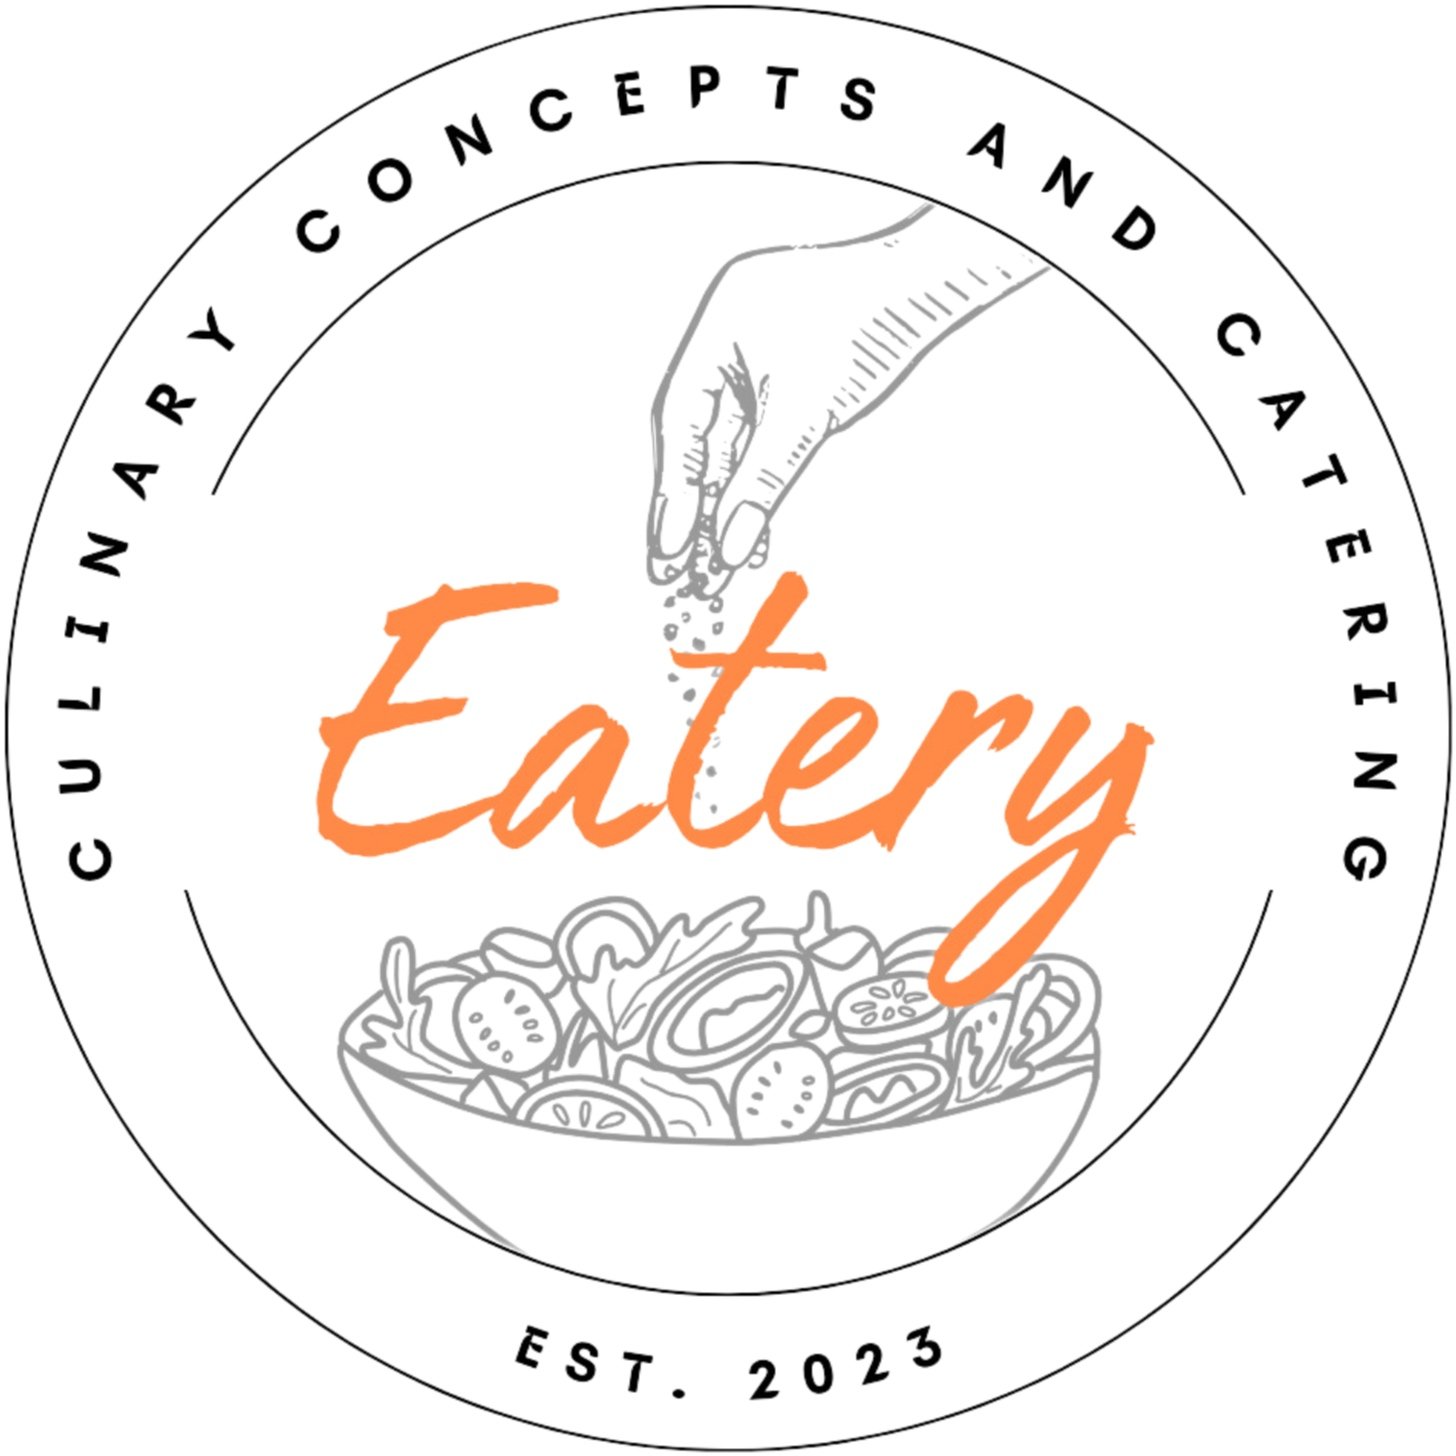 Eatery Concepts